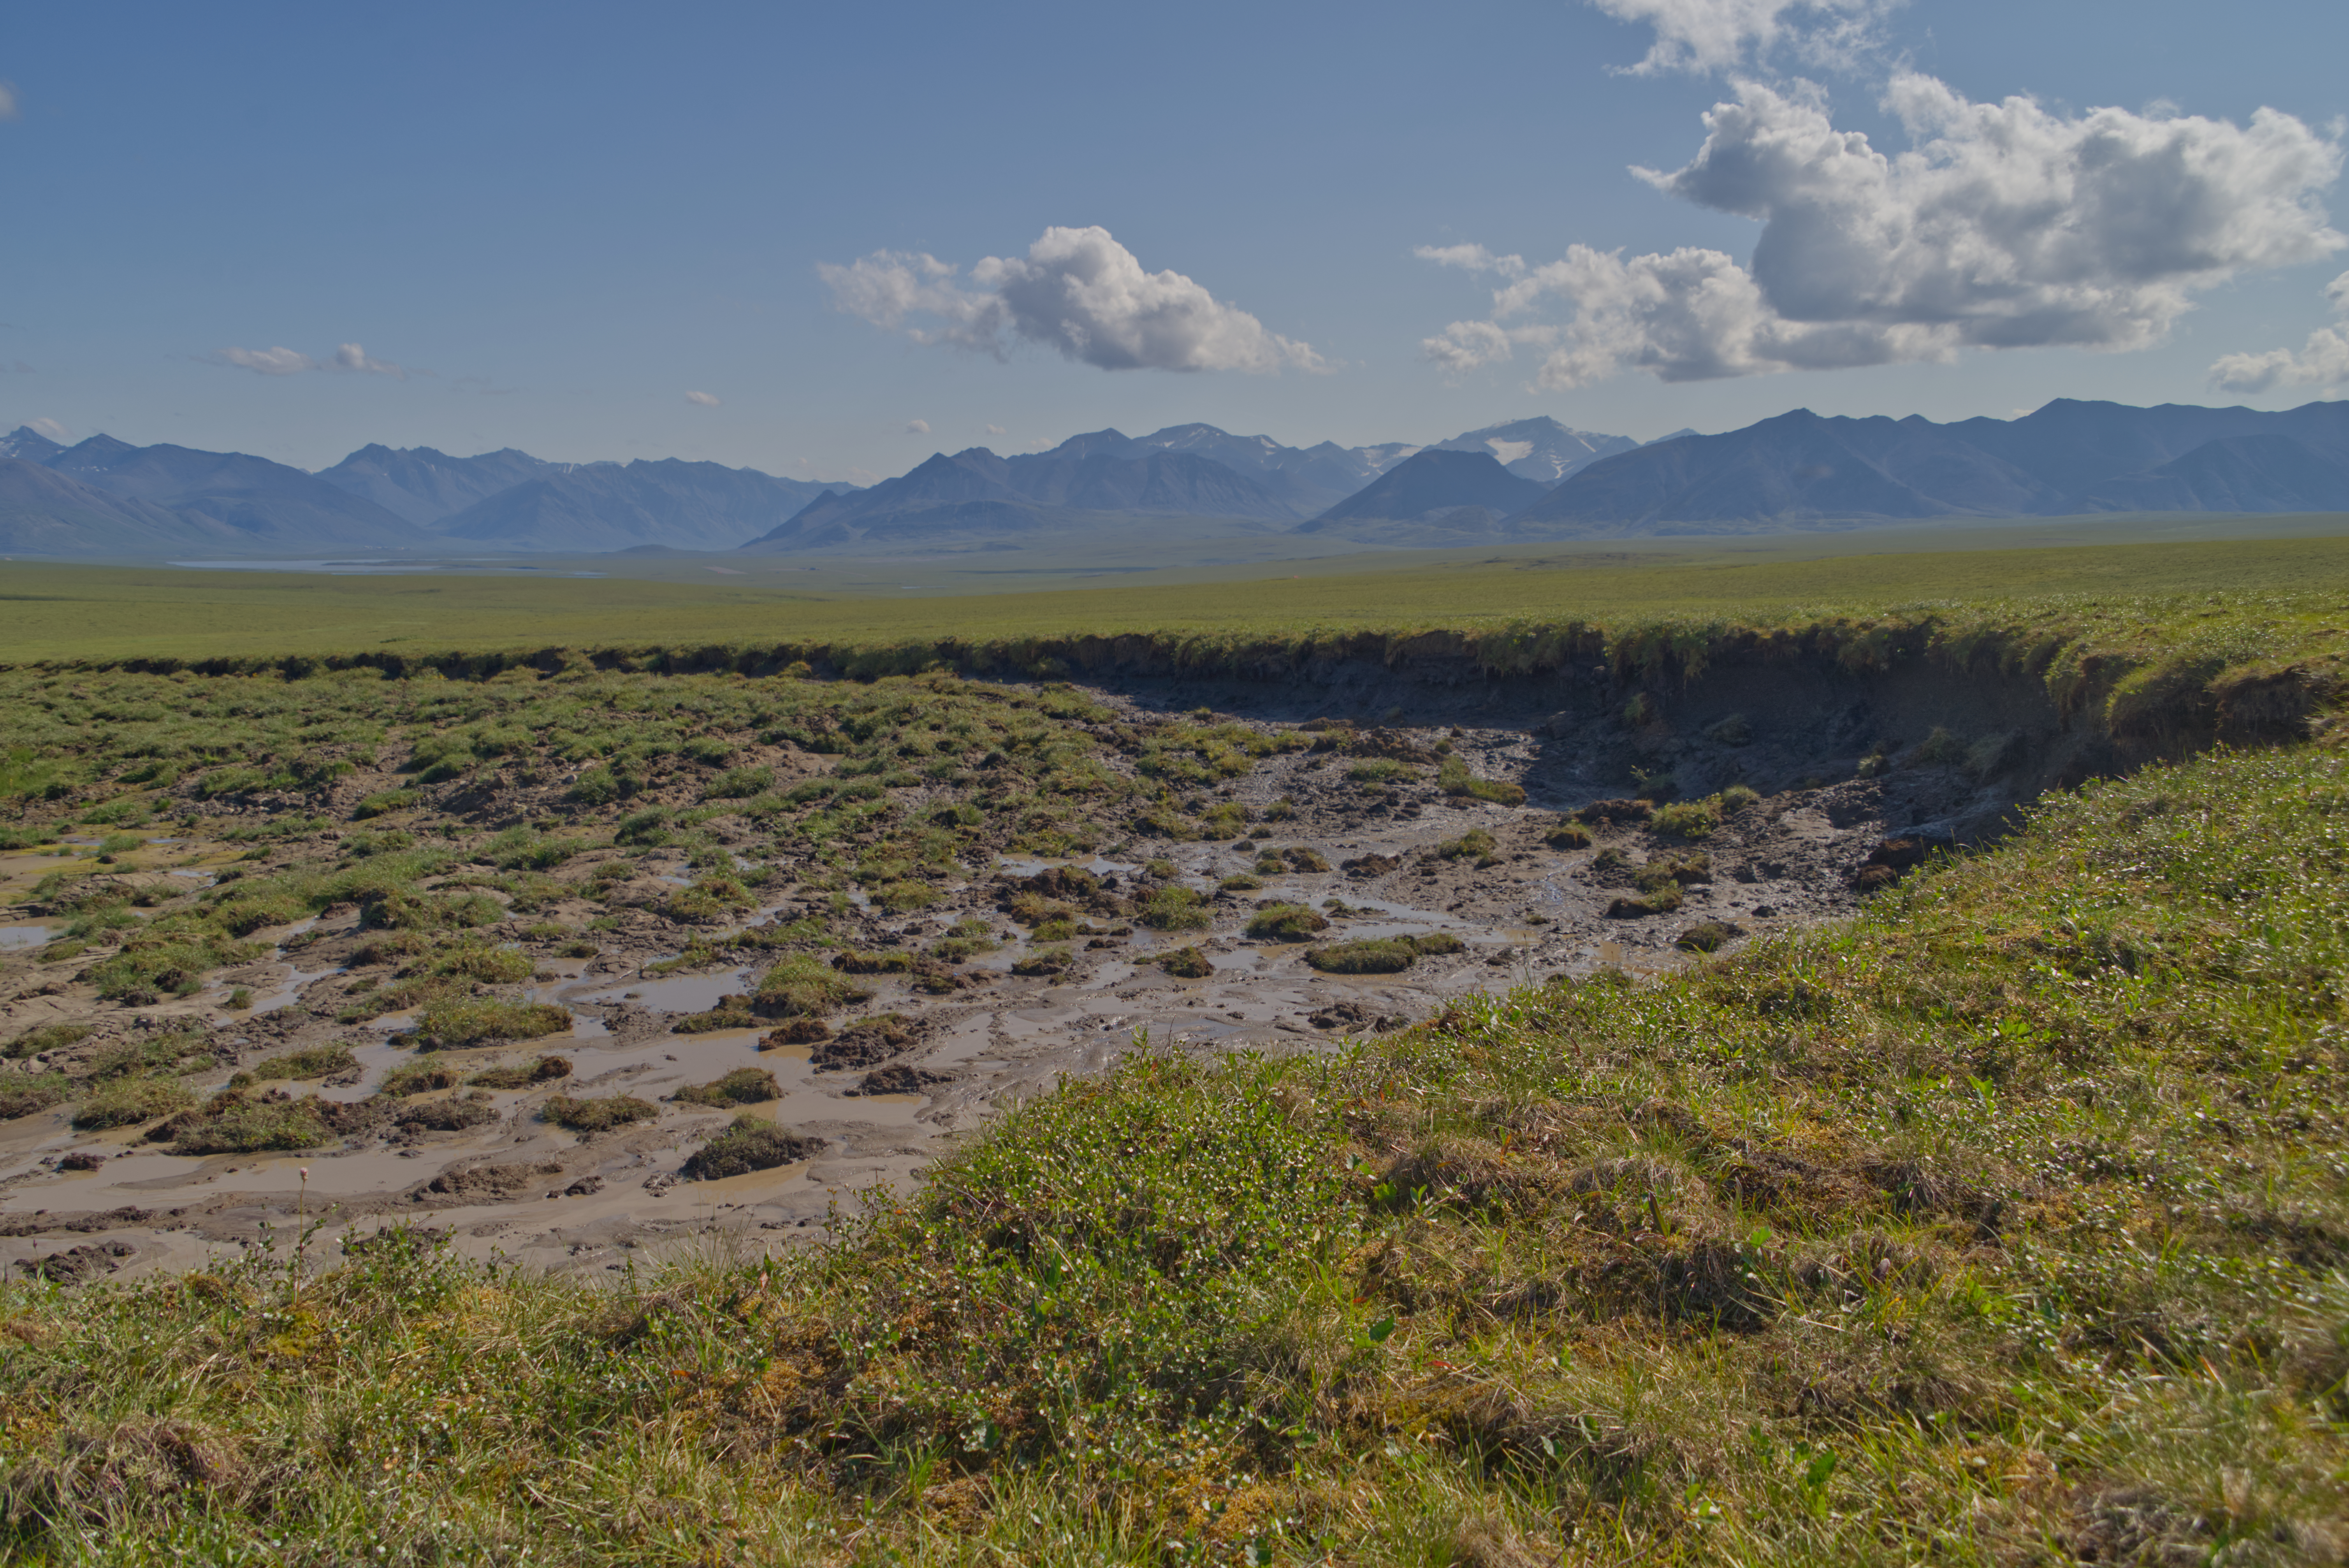 A mud and grass field with mountains in a distance some with snow under blue skies with white clouds.